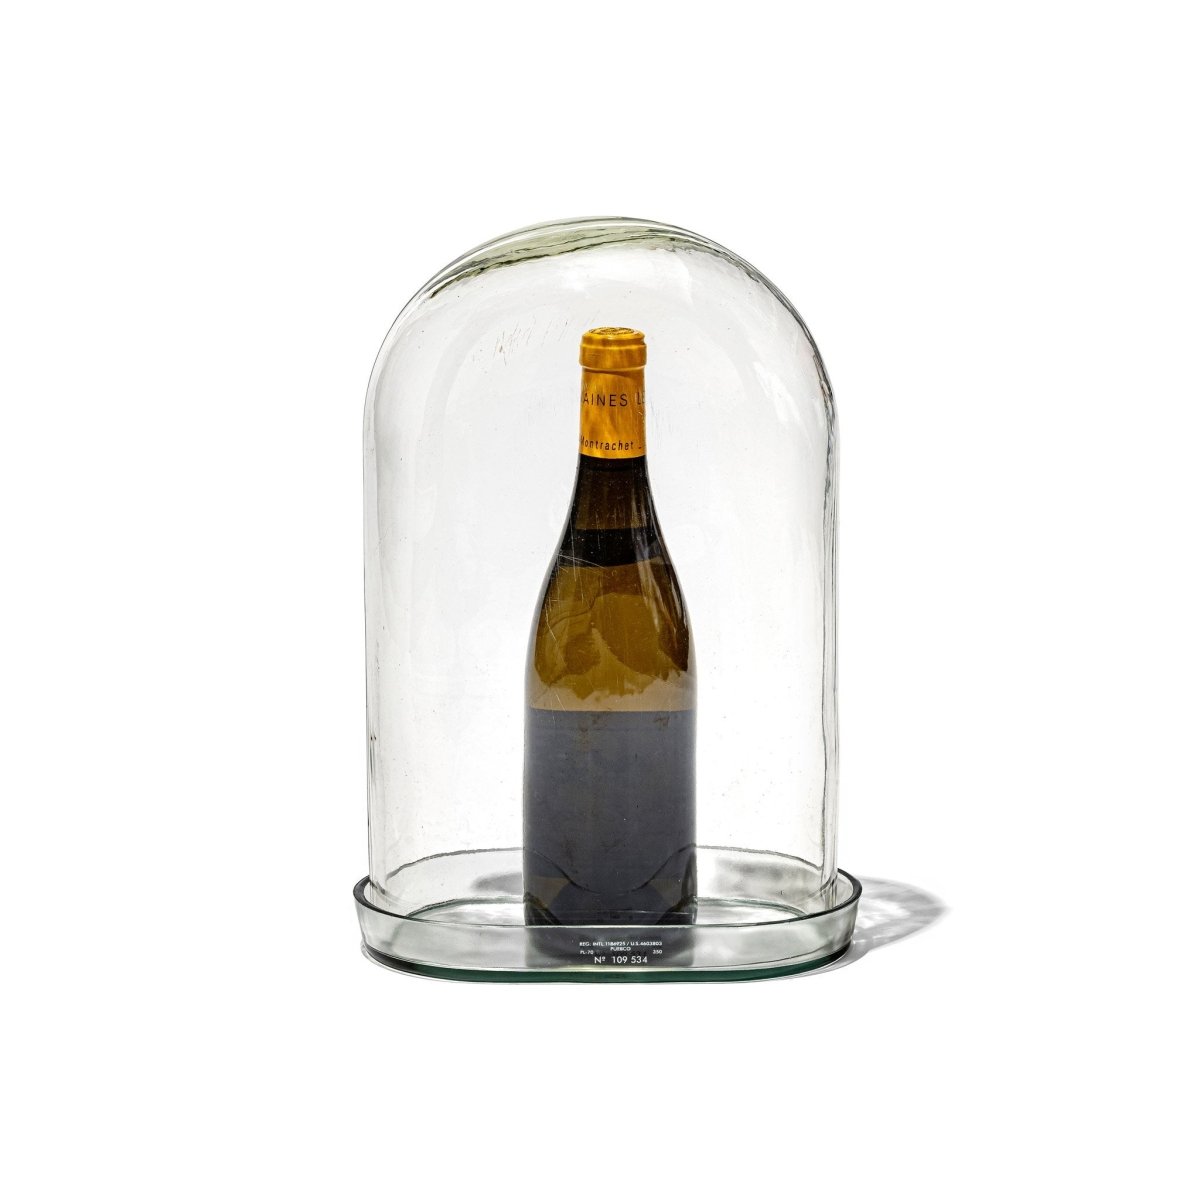 puebco Glass Display Dome - lily & onyx